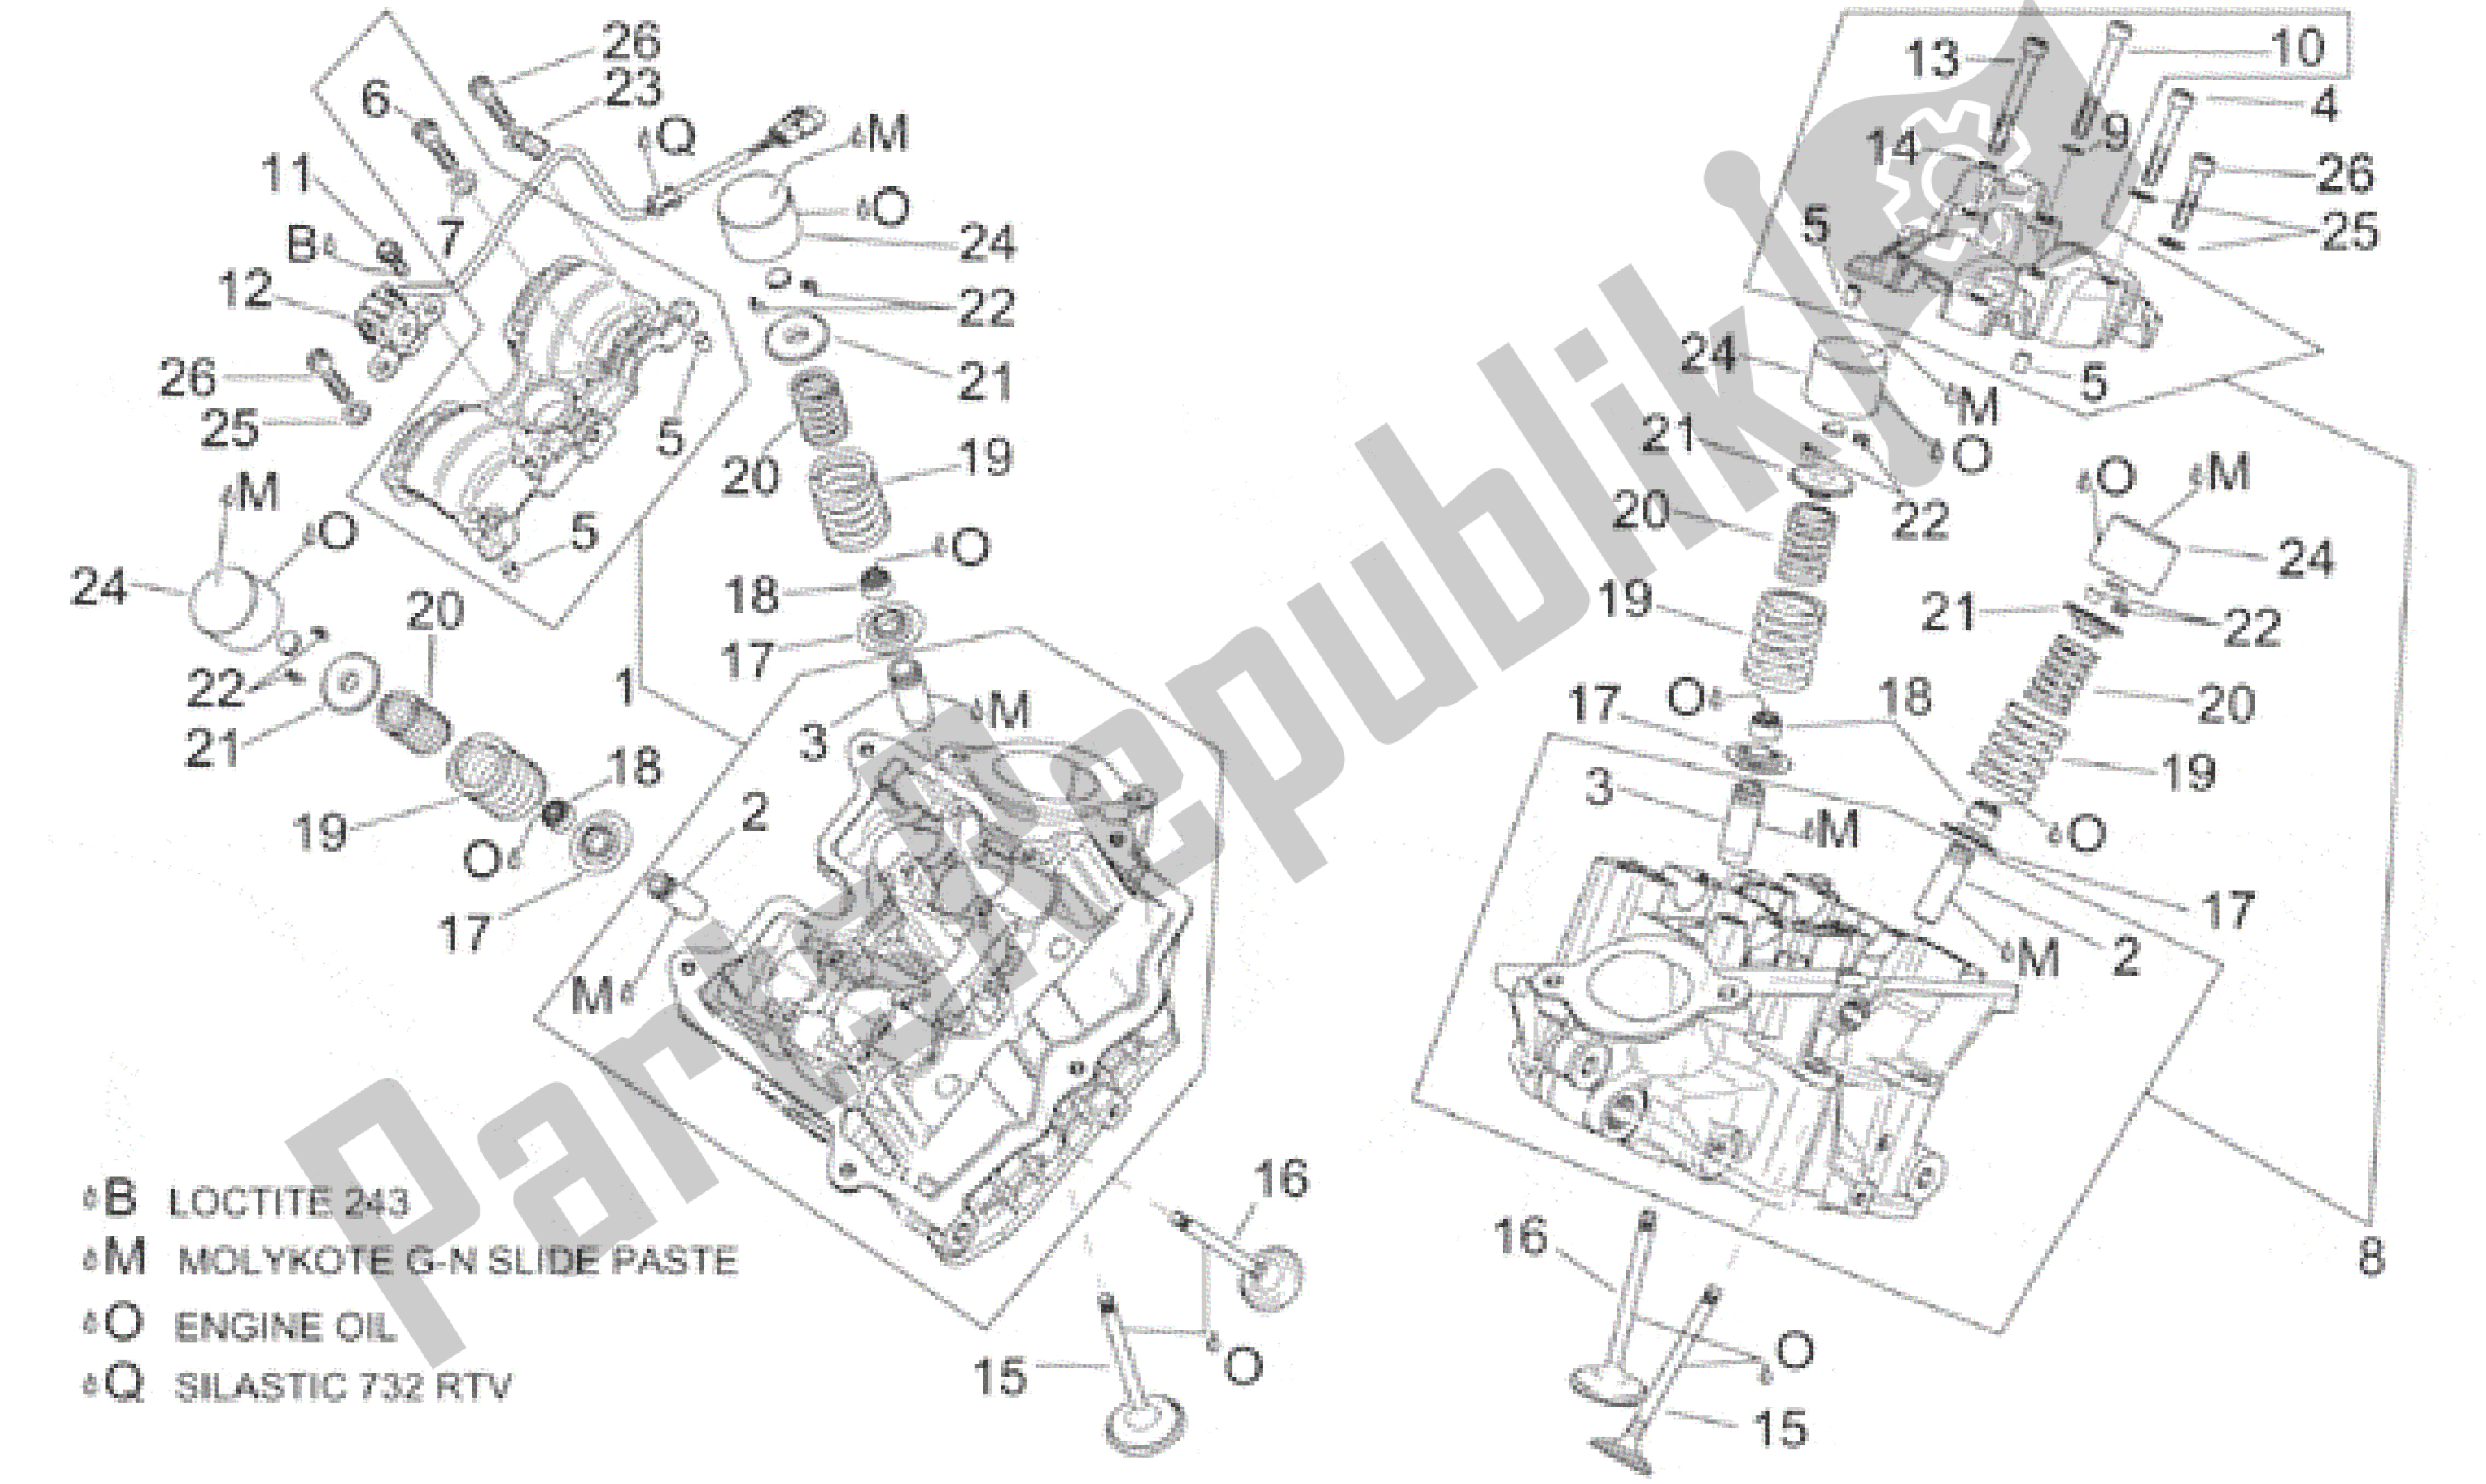 All parts for the Cylinder Head And Valves of the Aprilia SL Falco 1000 2000 - 2002